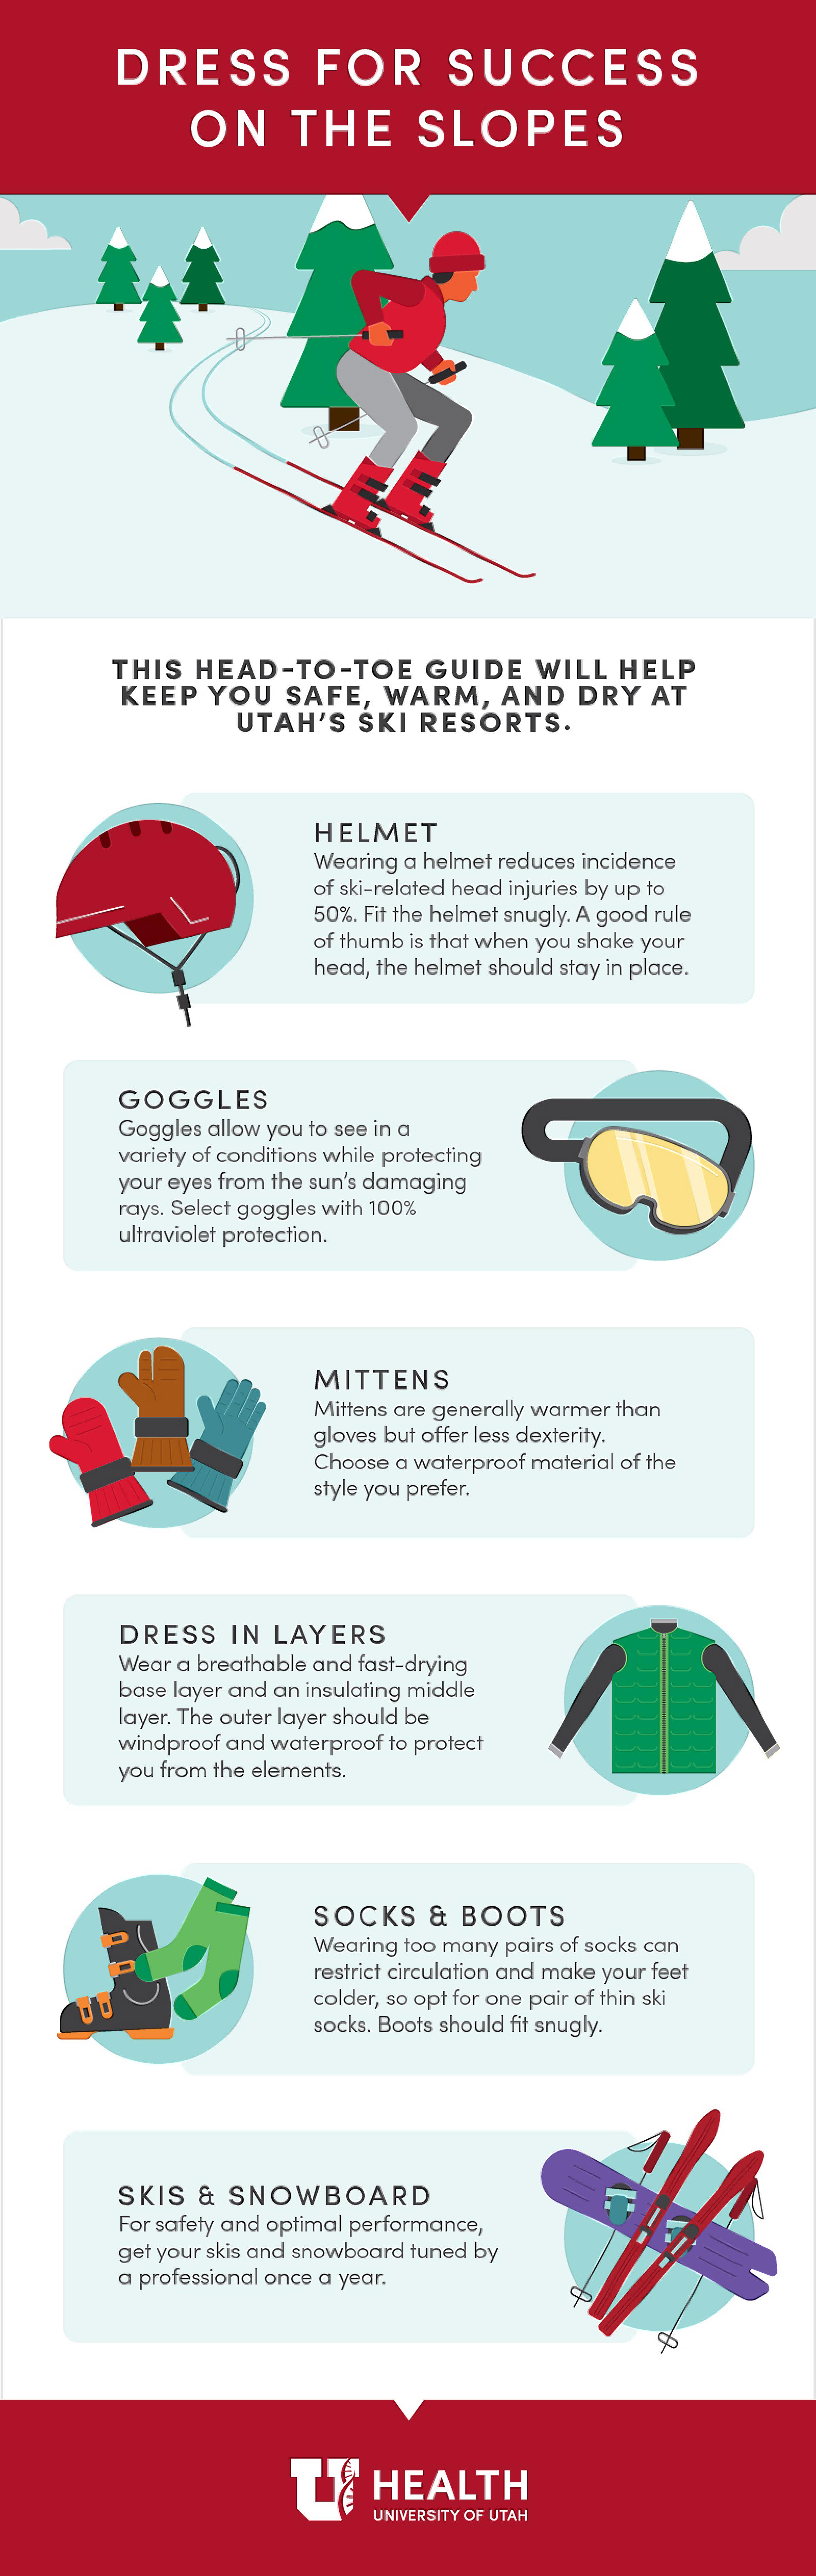 Dress for success on the slopes infographic